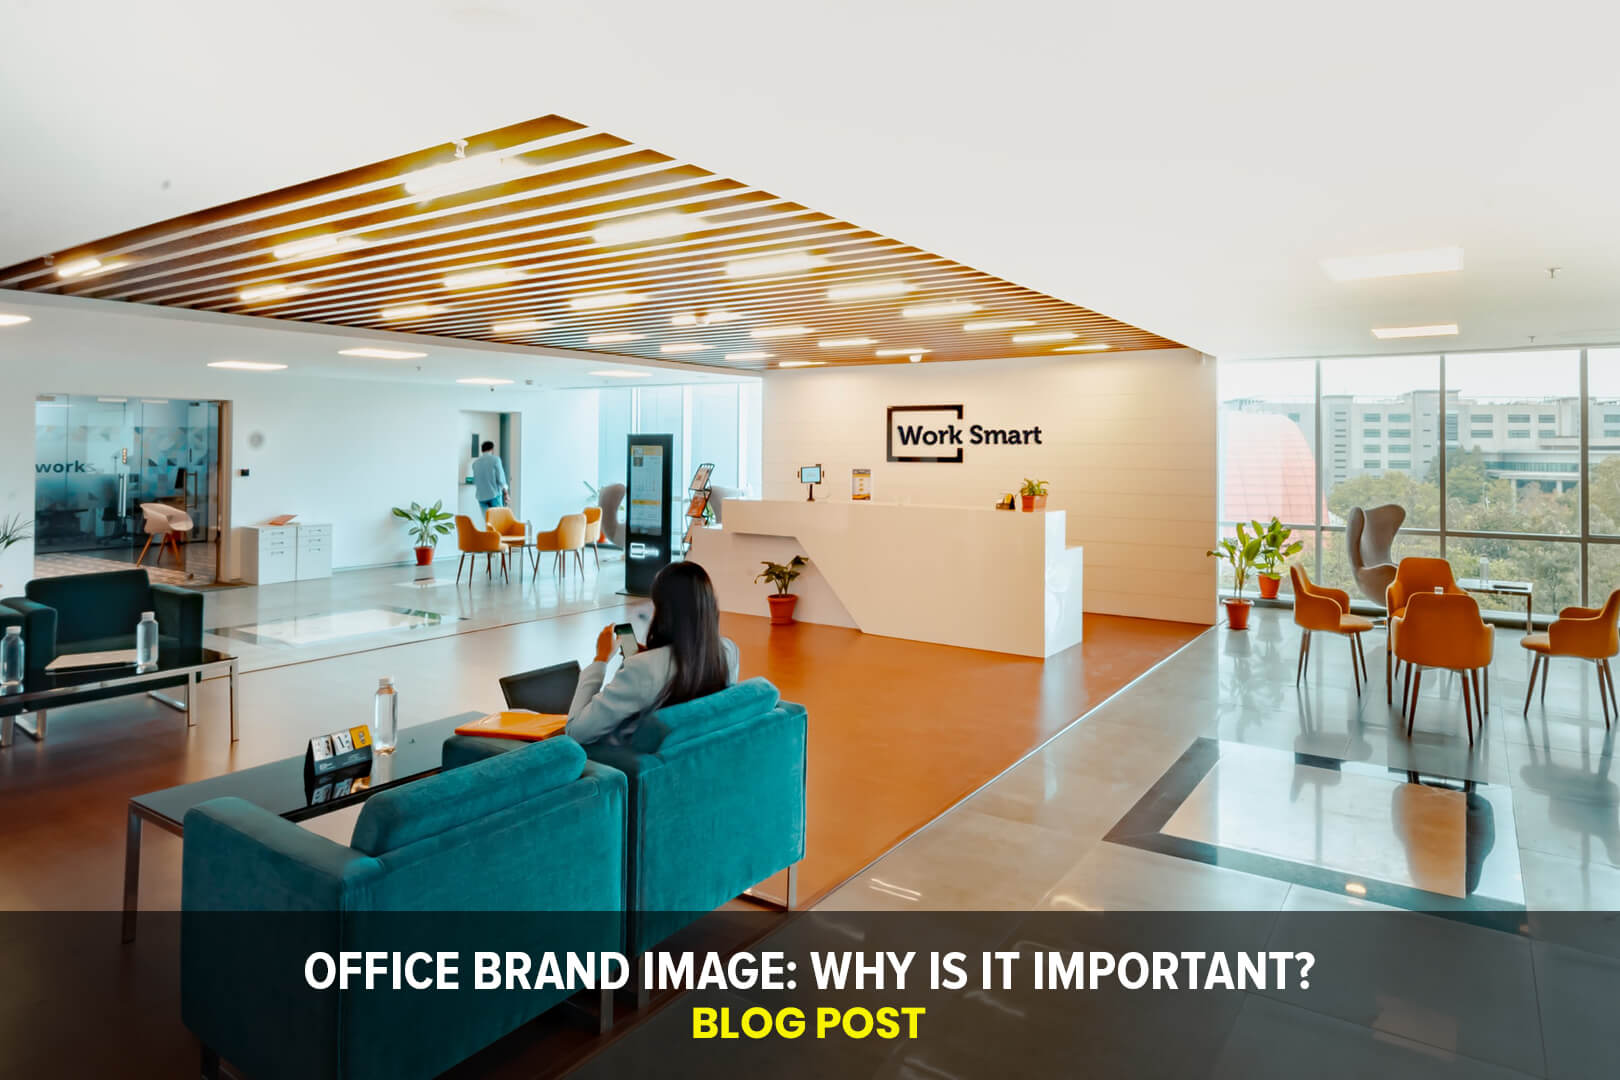 Office Brand Image: Why is it important?